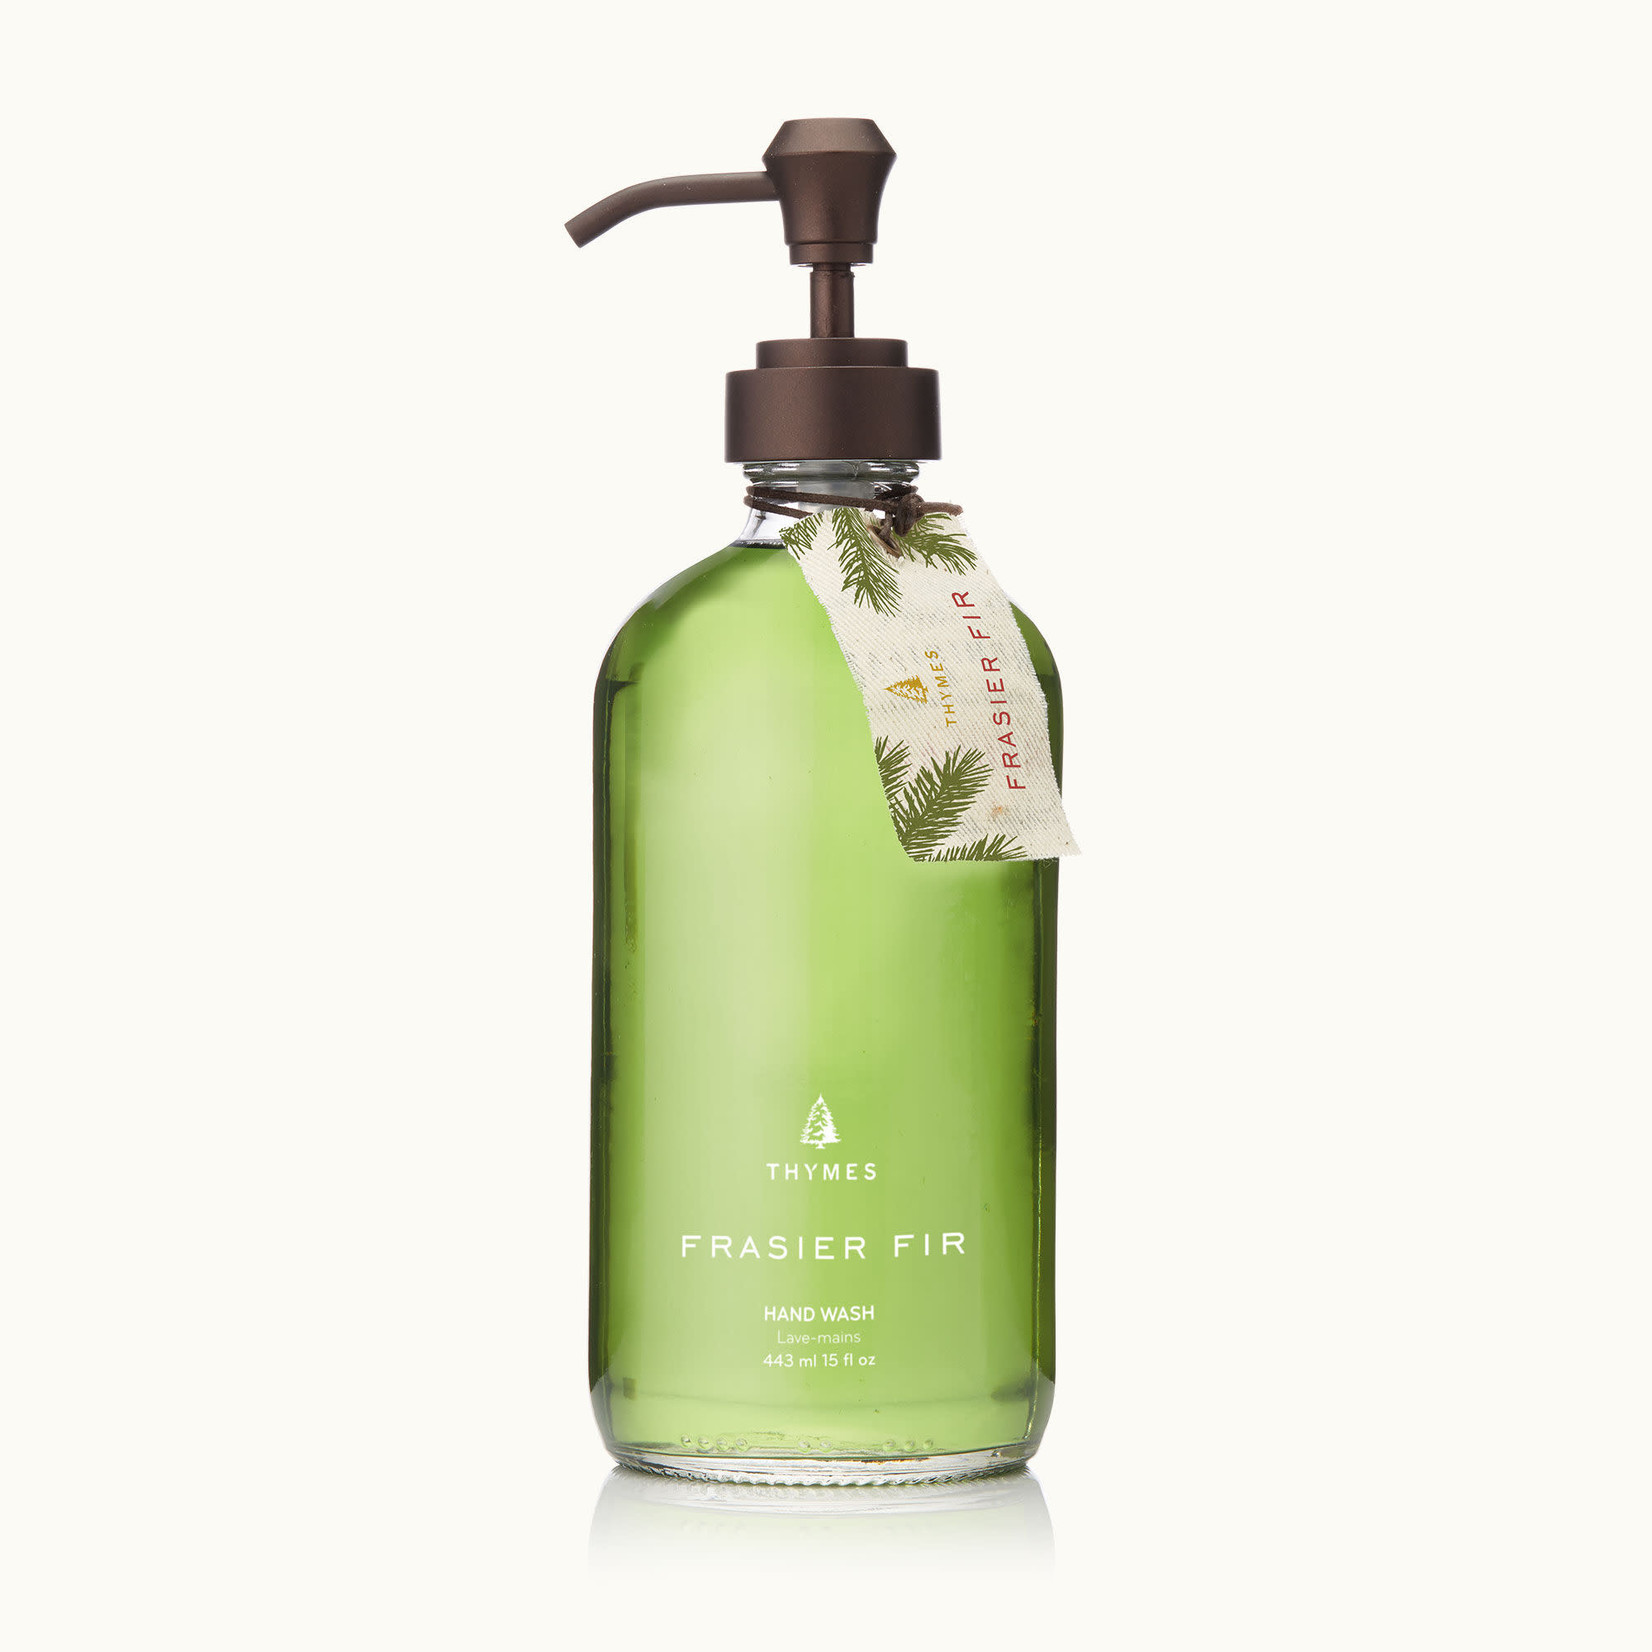 Thymes Thymes Frasier Fir Hand Wash Large